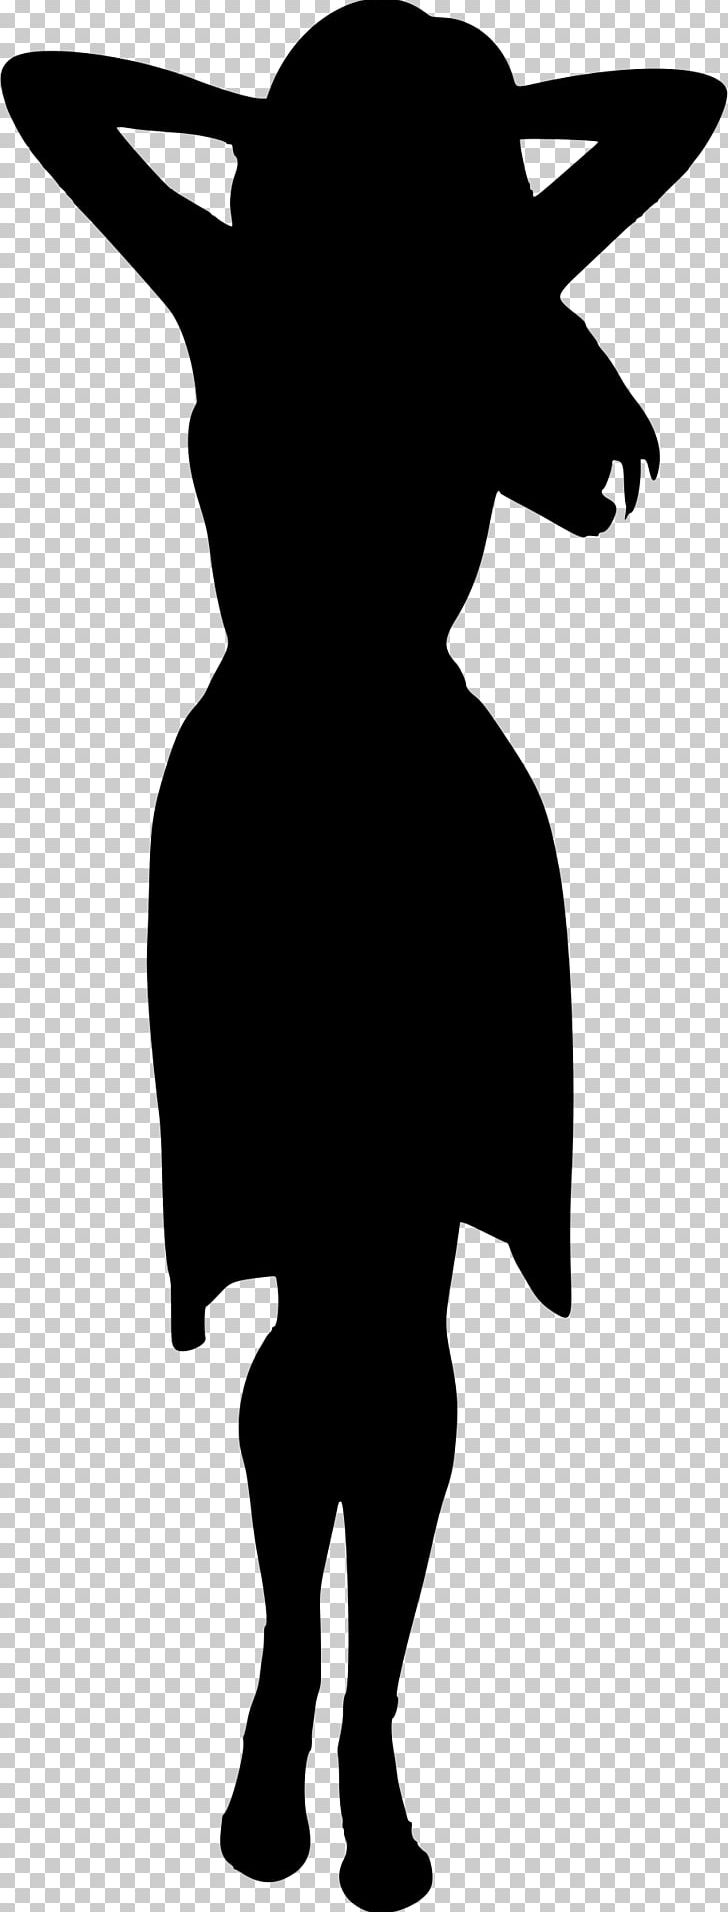 La Finestra Alle Spalle Silhouette Woman PNG, Clipart, Animals, Art, Black, Black And White, Cattle Like Mammal Free PNG Download